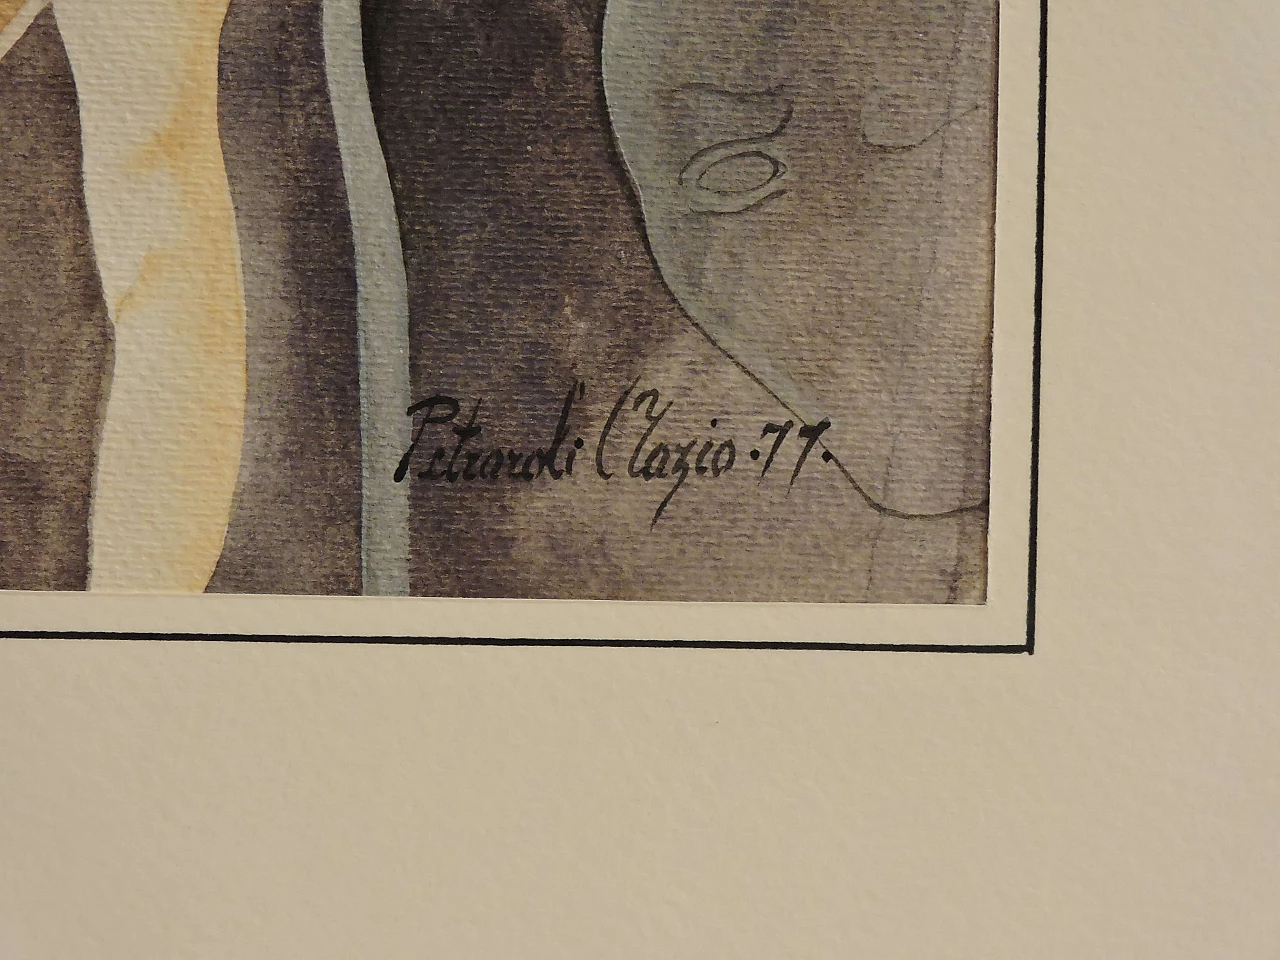 Watercolor on cardboard composition with self-portrait, signed 1177953